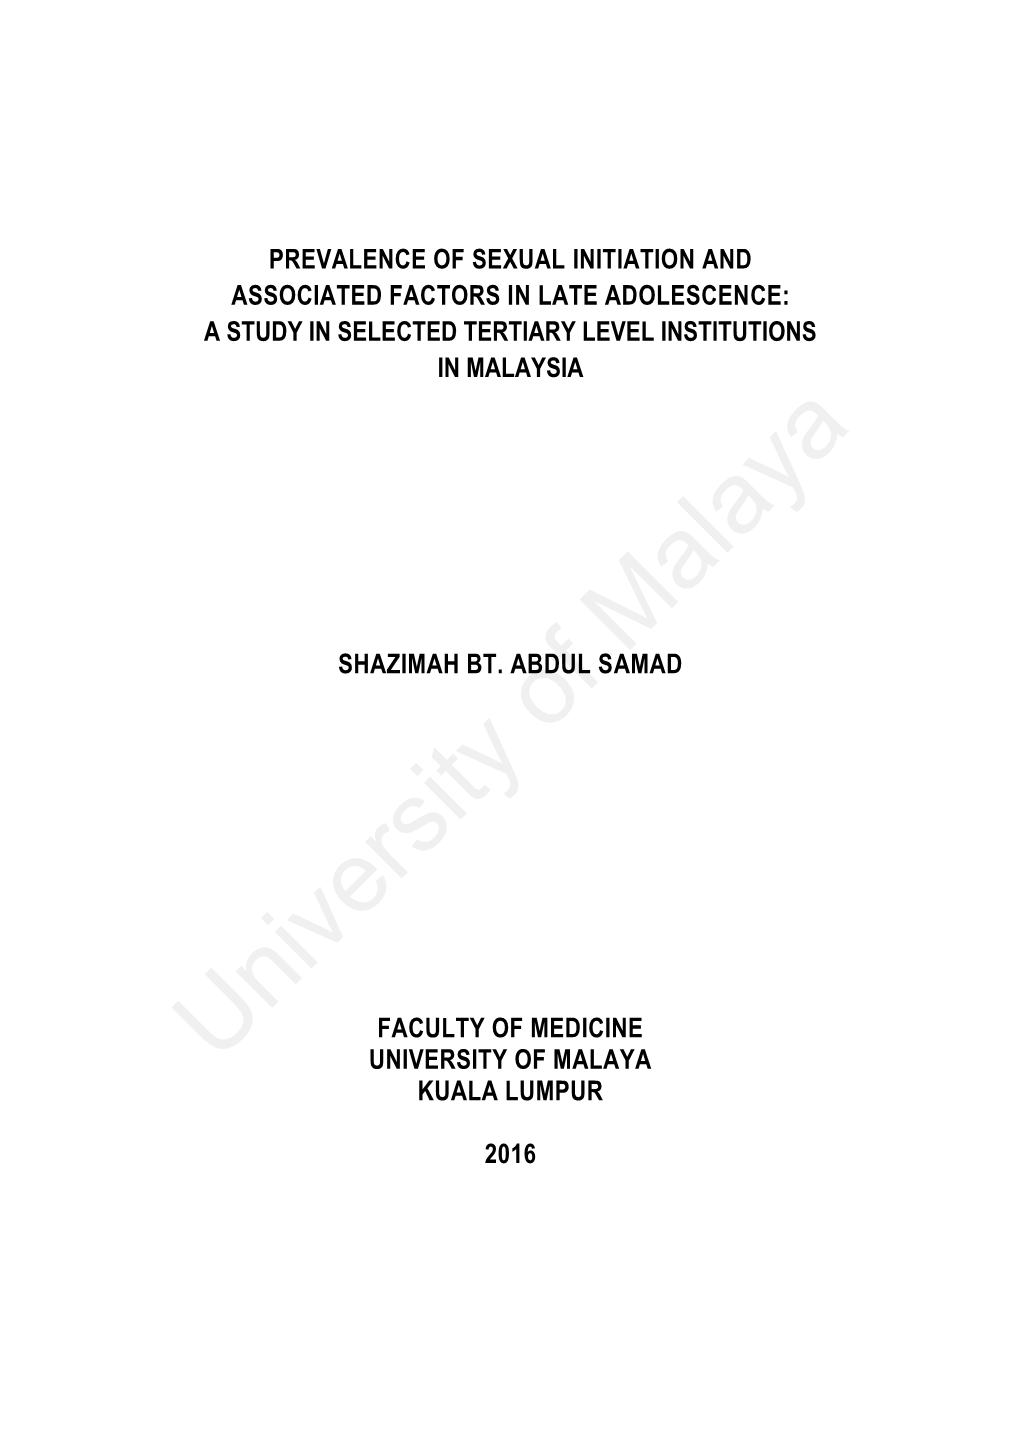 Prevalence of Sexual Initiation and Associated Factors in Late Adolescence: a Study in Selected Tertiary Level Institutions in Malaysia